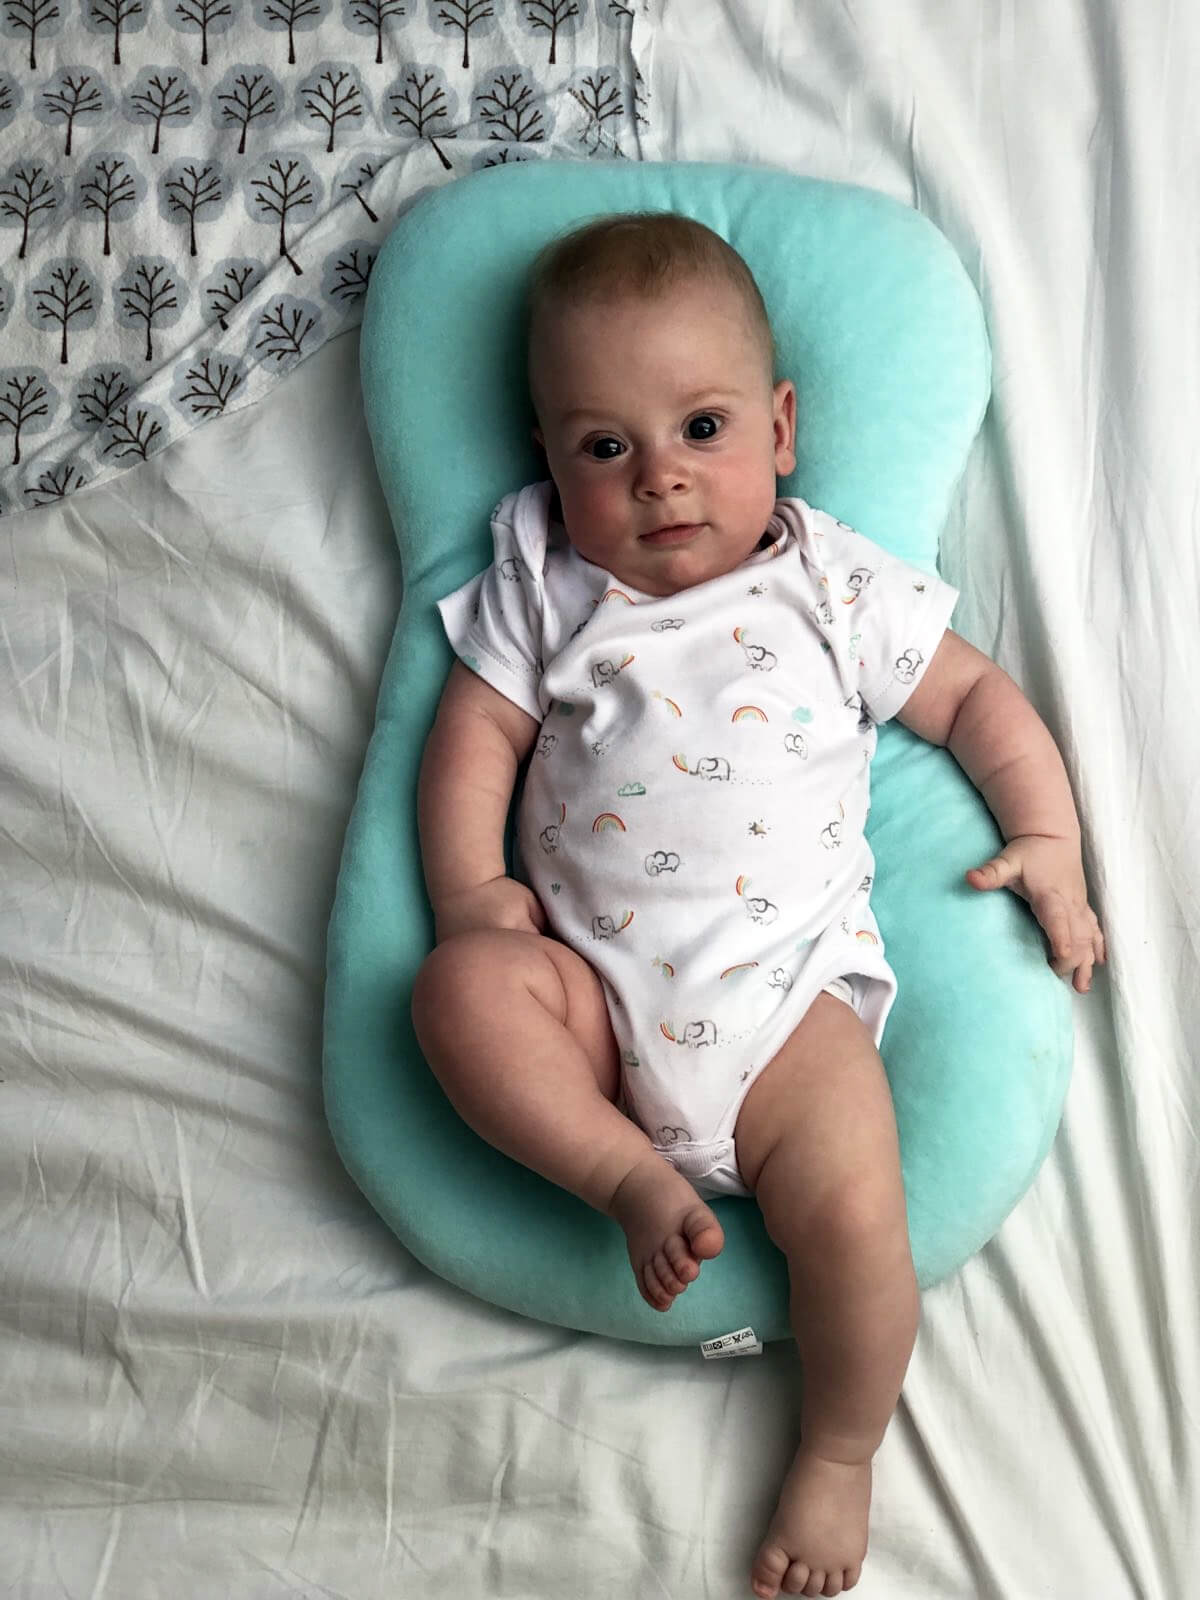 It’s hard to believe that Andrius was born premature. Thanks to the equipment that we supplied, he was able to receive the care he urgently needed when he was born at 27 weeks.